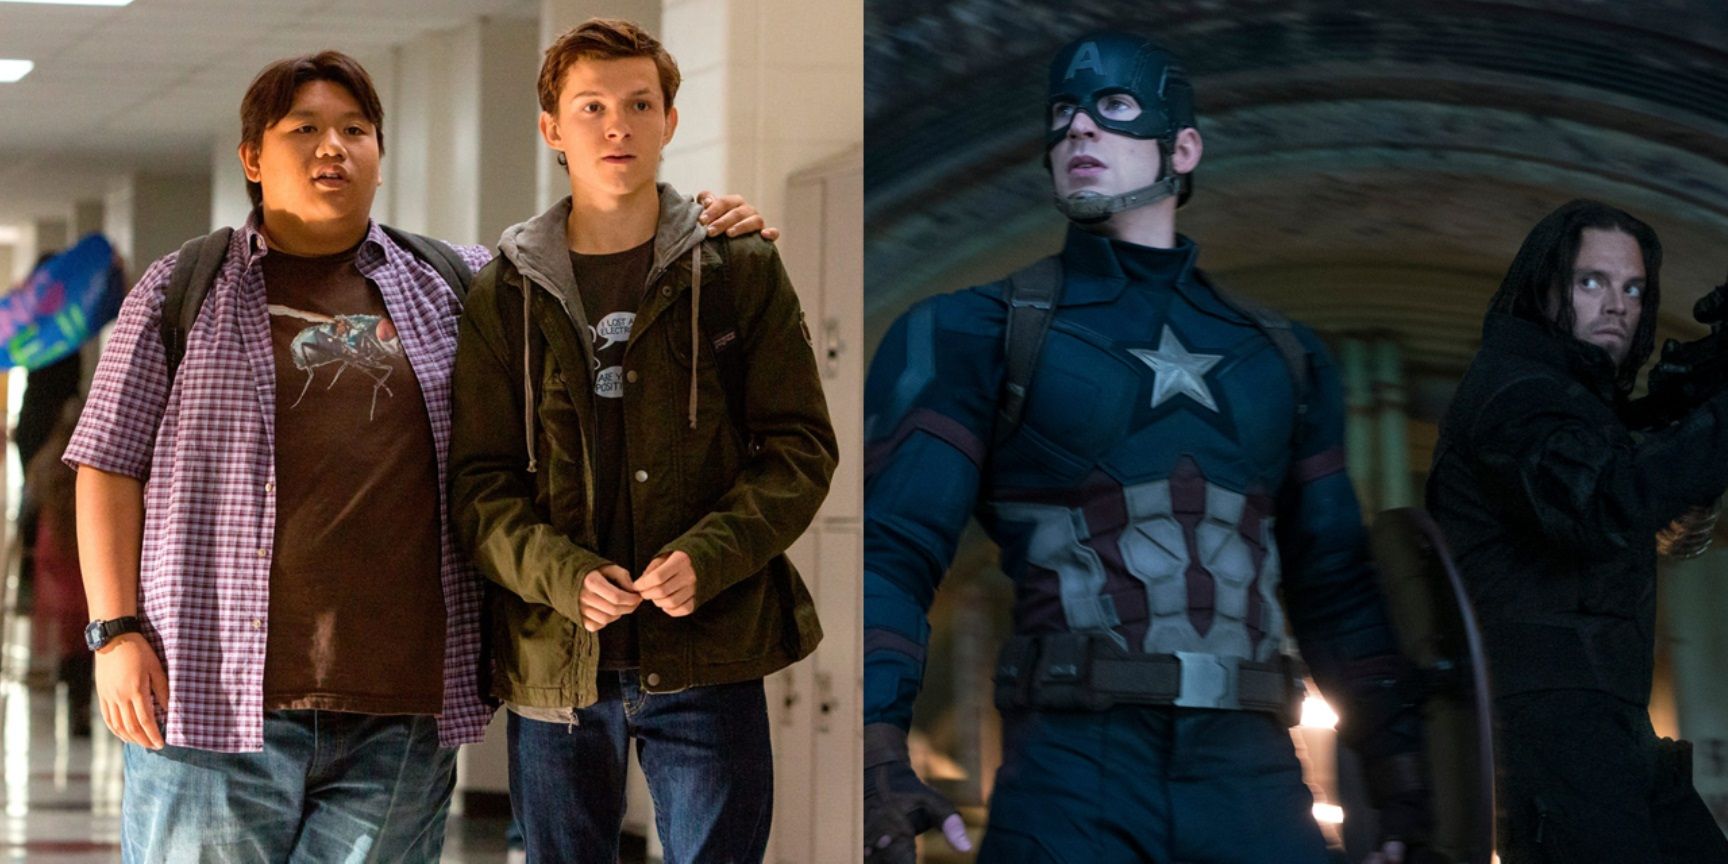 Split image of Peter and Ned in Spider-Man Homecoming and Steve and Bucky in Captain America Civil War